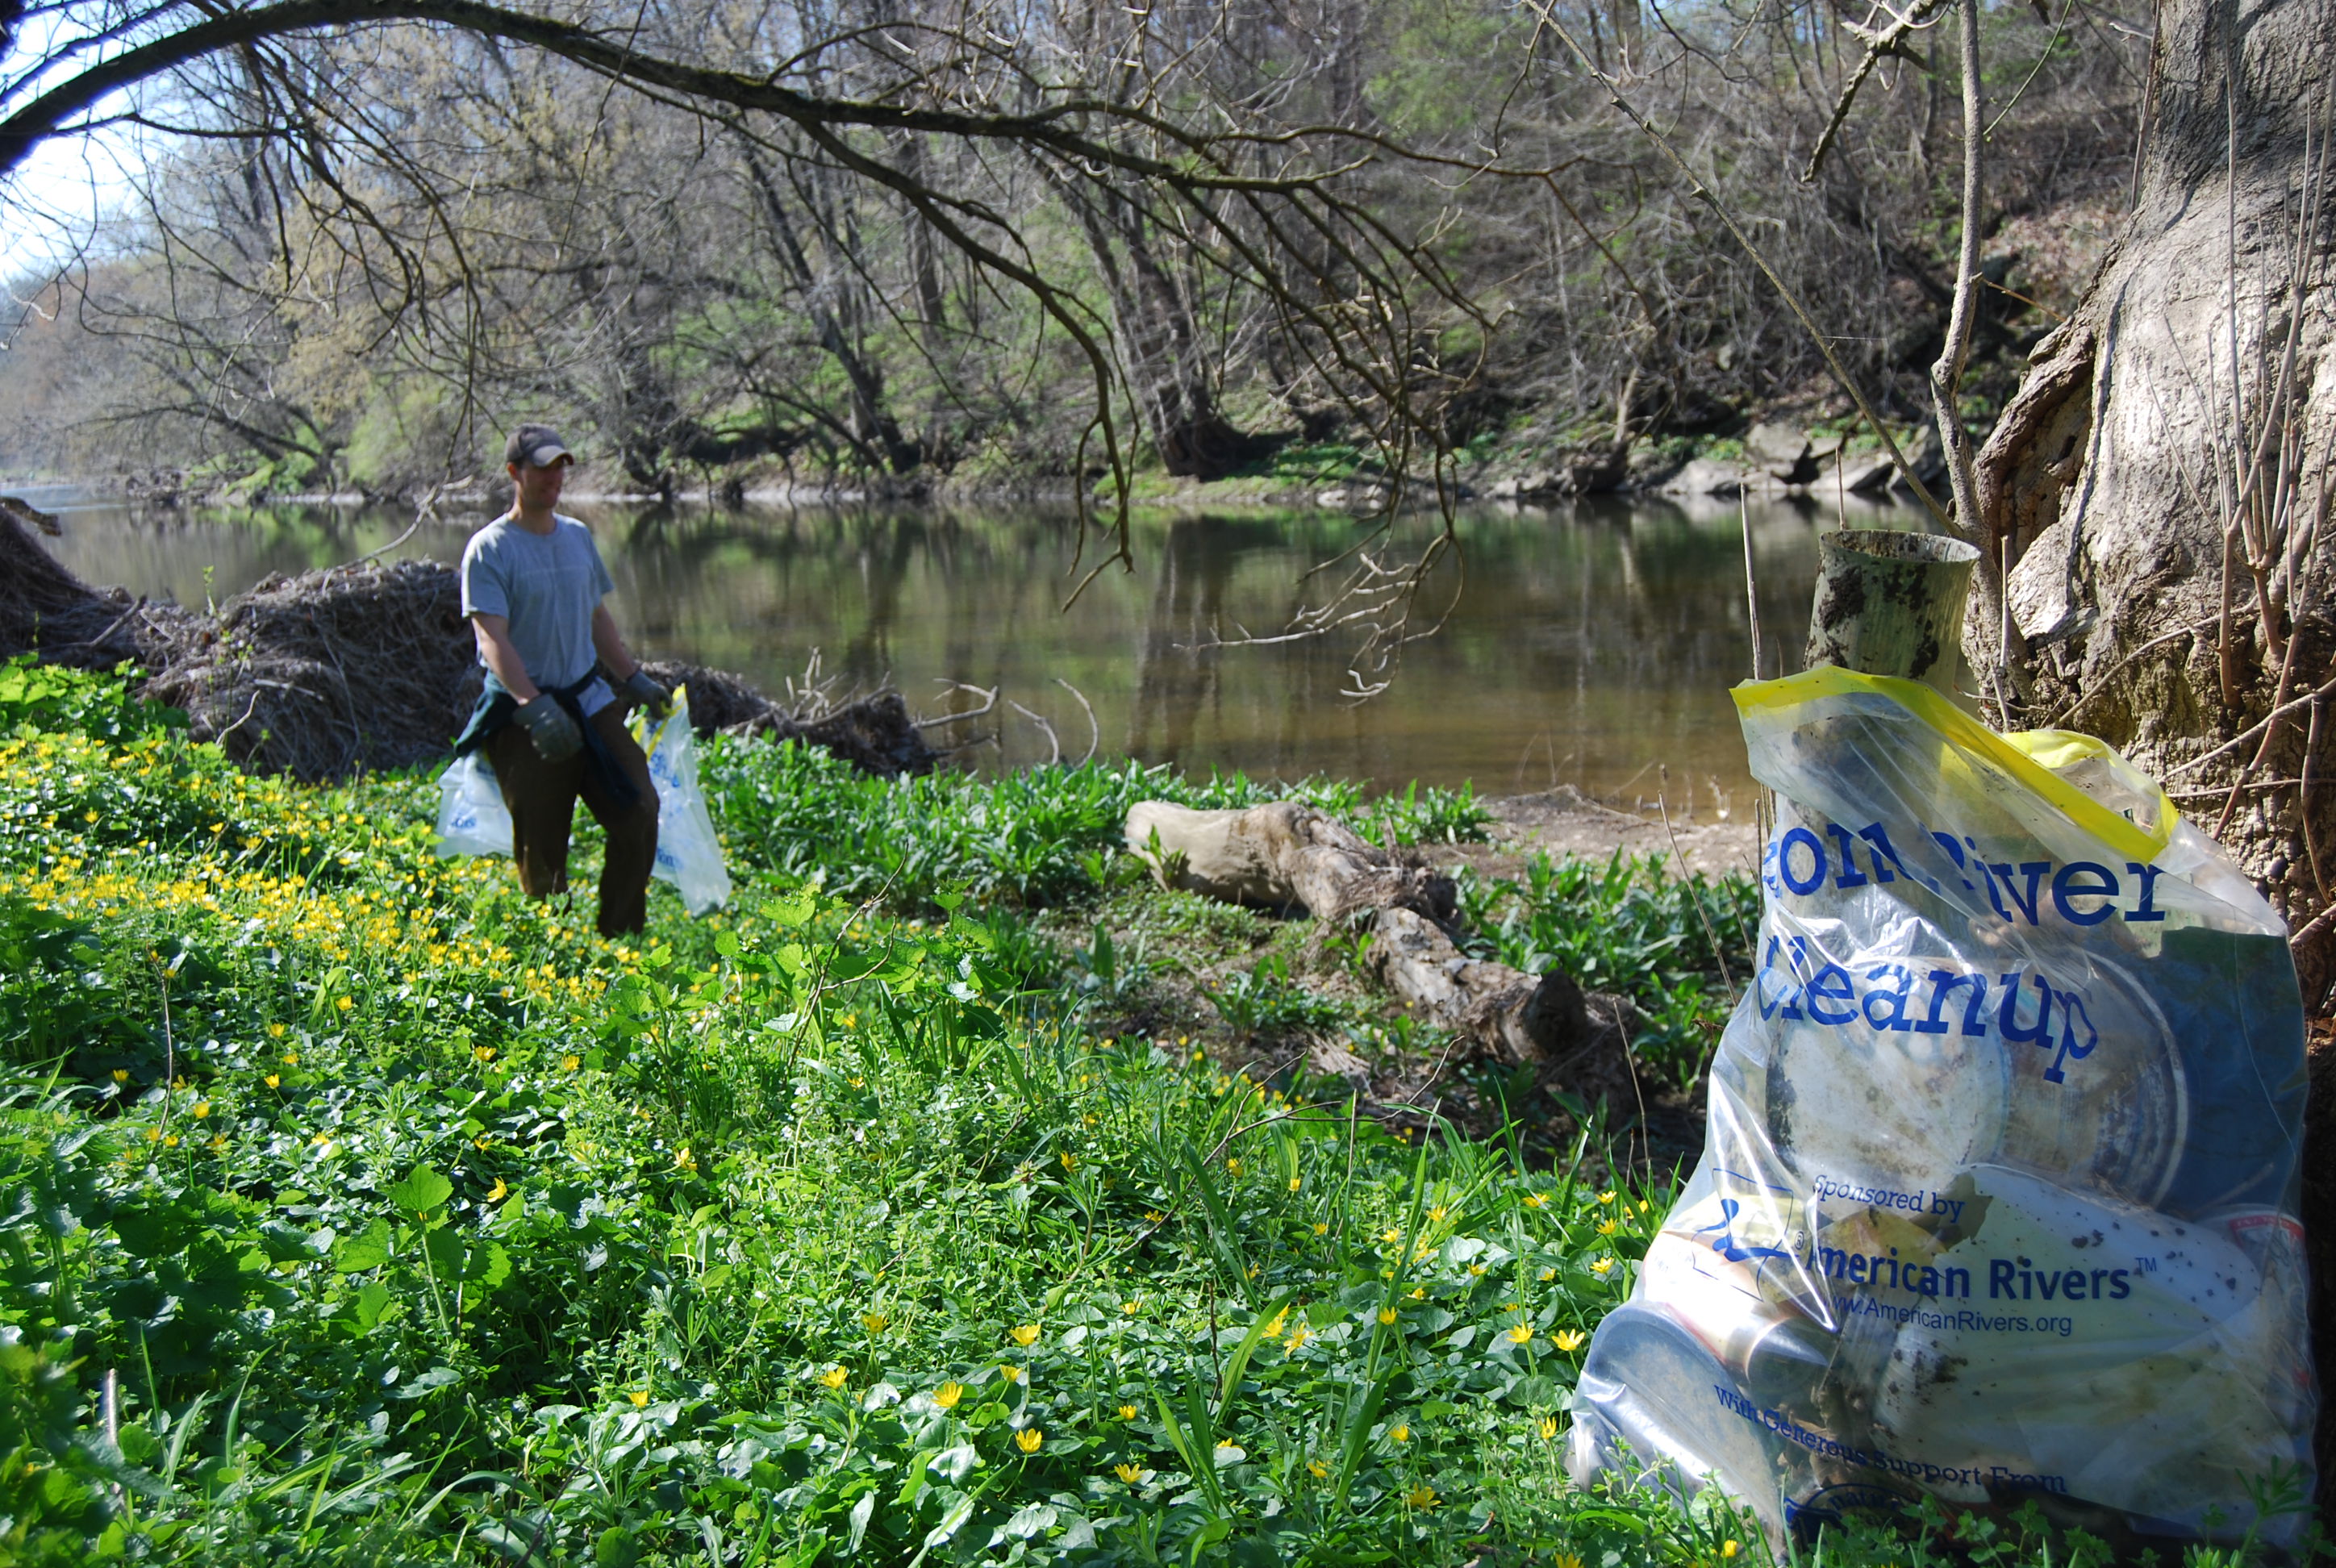 Volunteers cleaning up the river